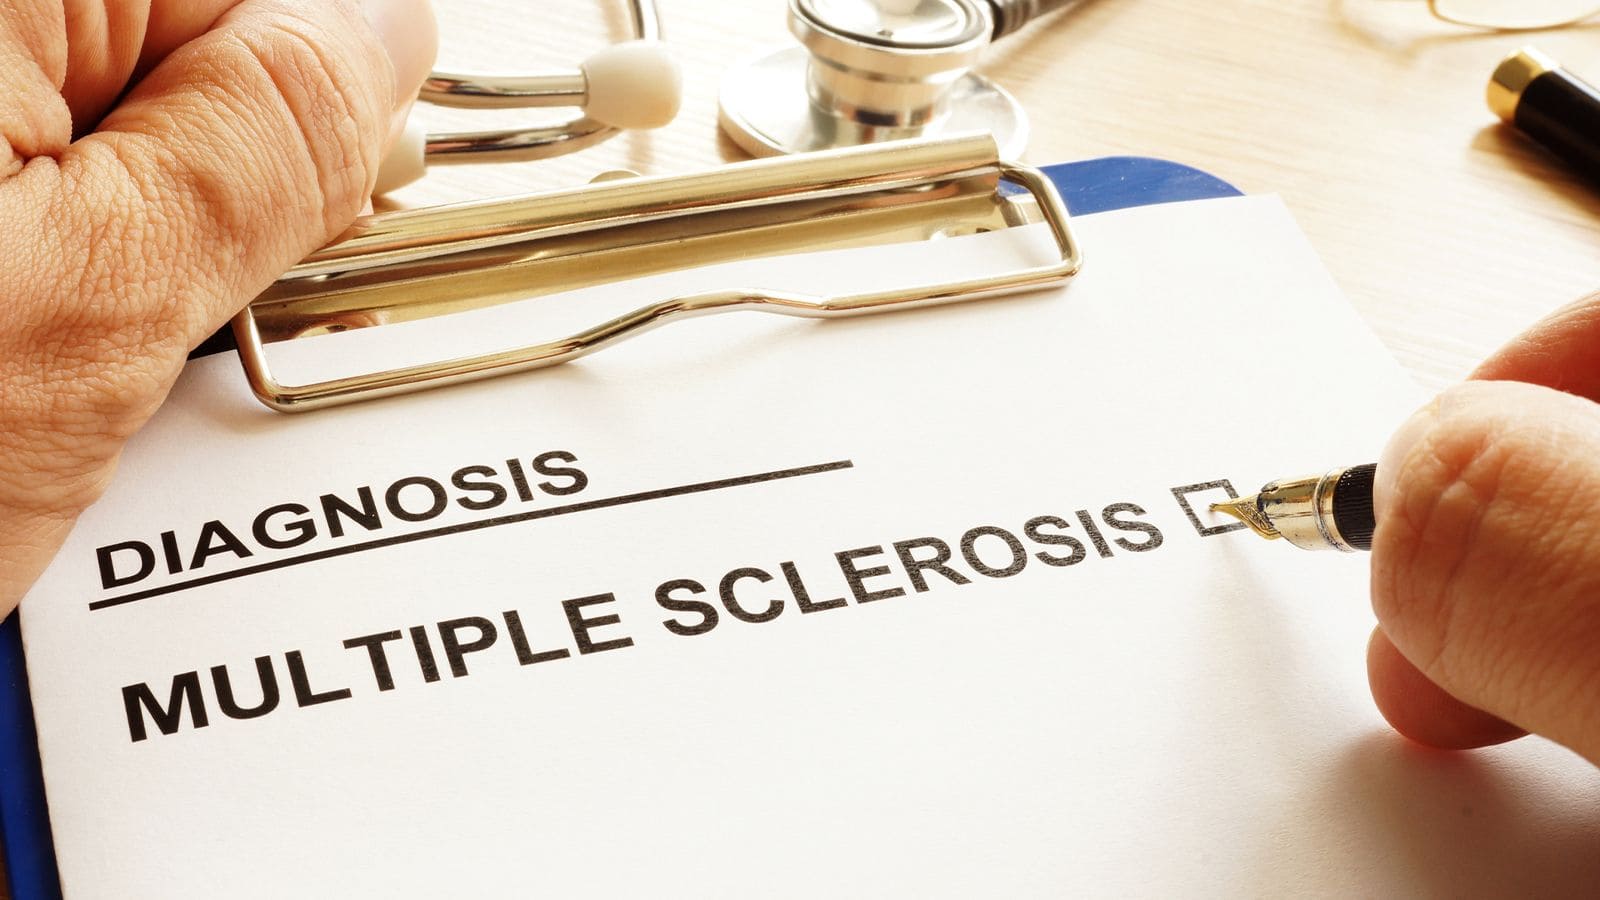 Clipboard with a paper that says diagnosed with multiple sclerosis